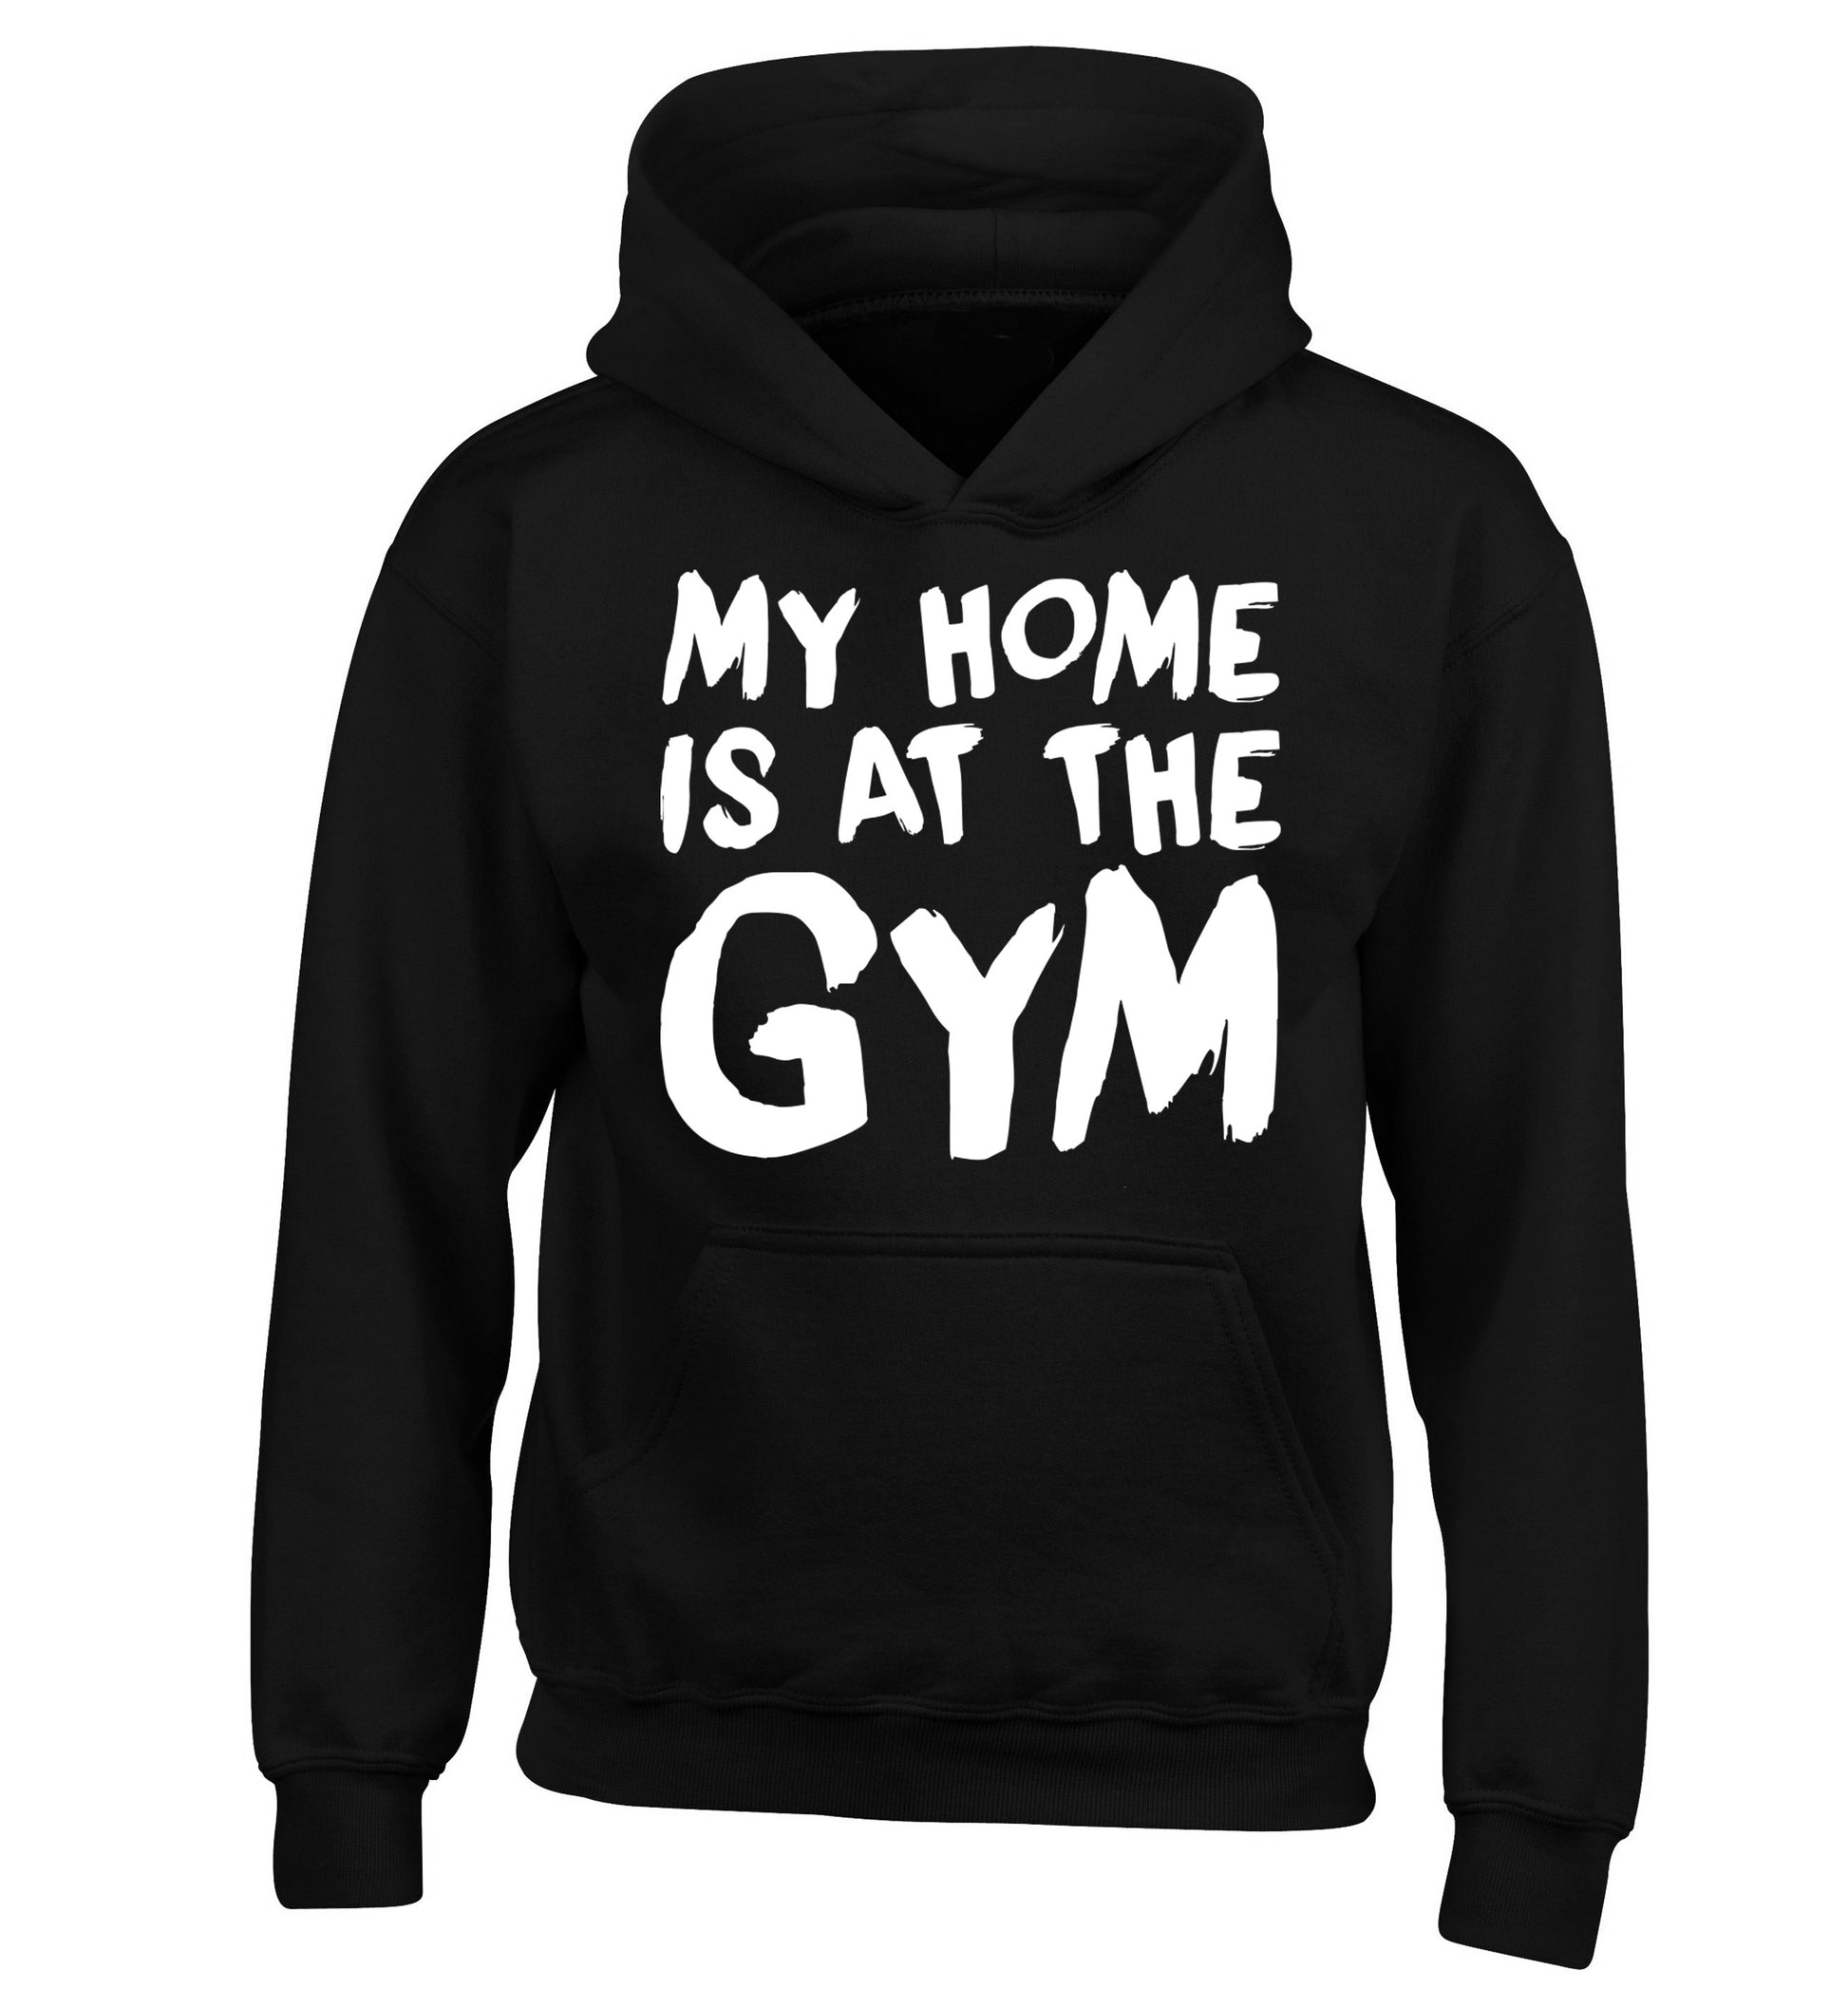 My home is at the gym children's black hoodie 12-14 Years